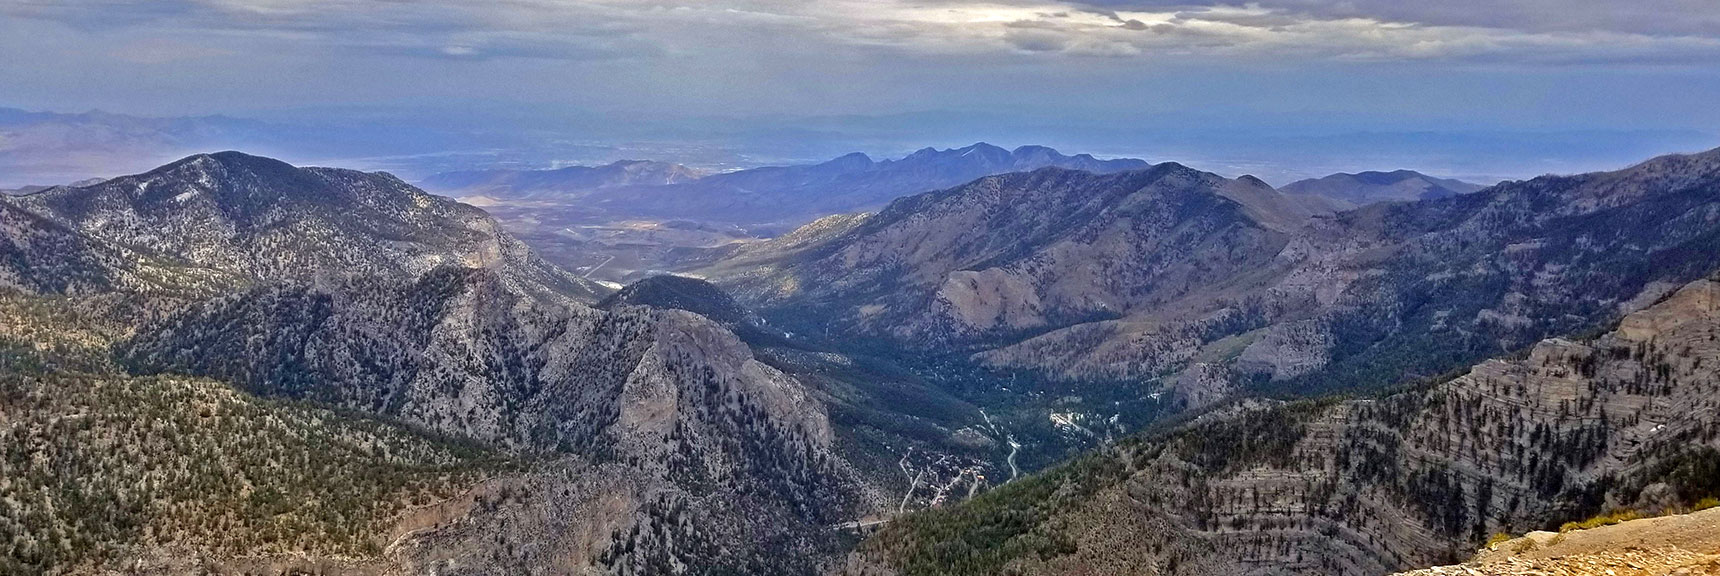 Best View of Kyle Canyon is Before Reaching Charleston Peak Summit - Framed by Harris Mt. and Fletcher Peak. | Lee and Charleston Peaks via Lee Canyon Mid Ridge | Mt Charleston Wilderness | Spring Mountains, Nevada